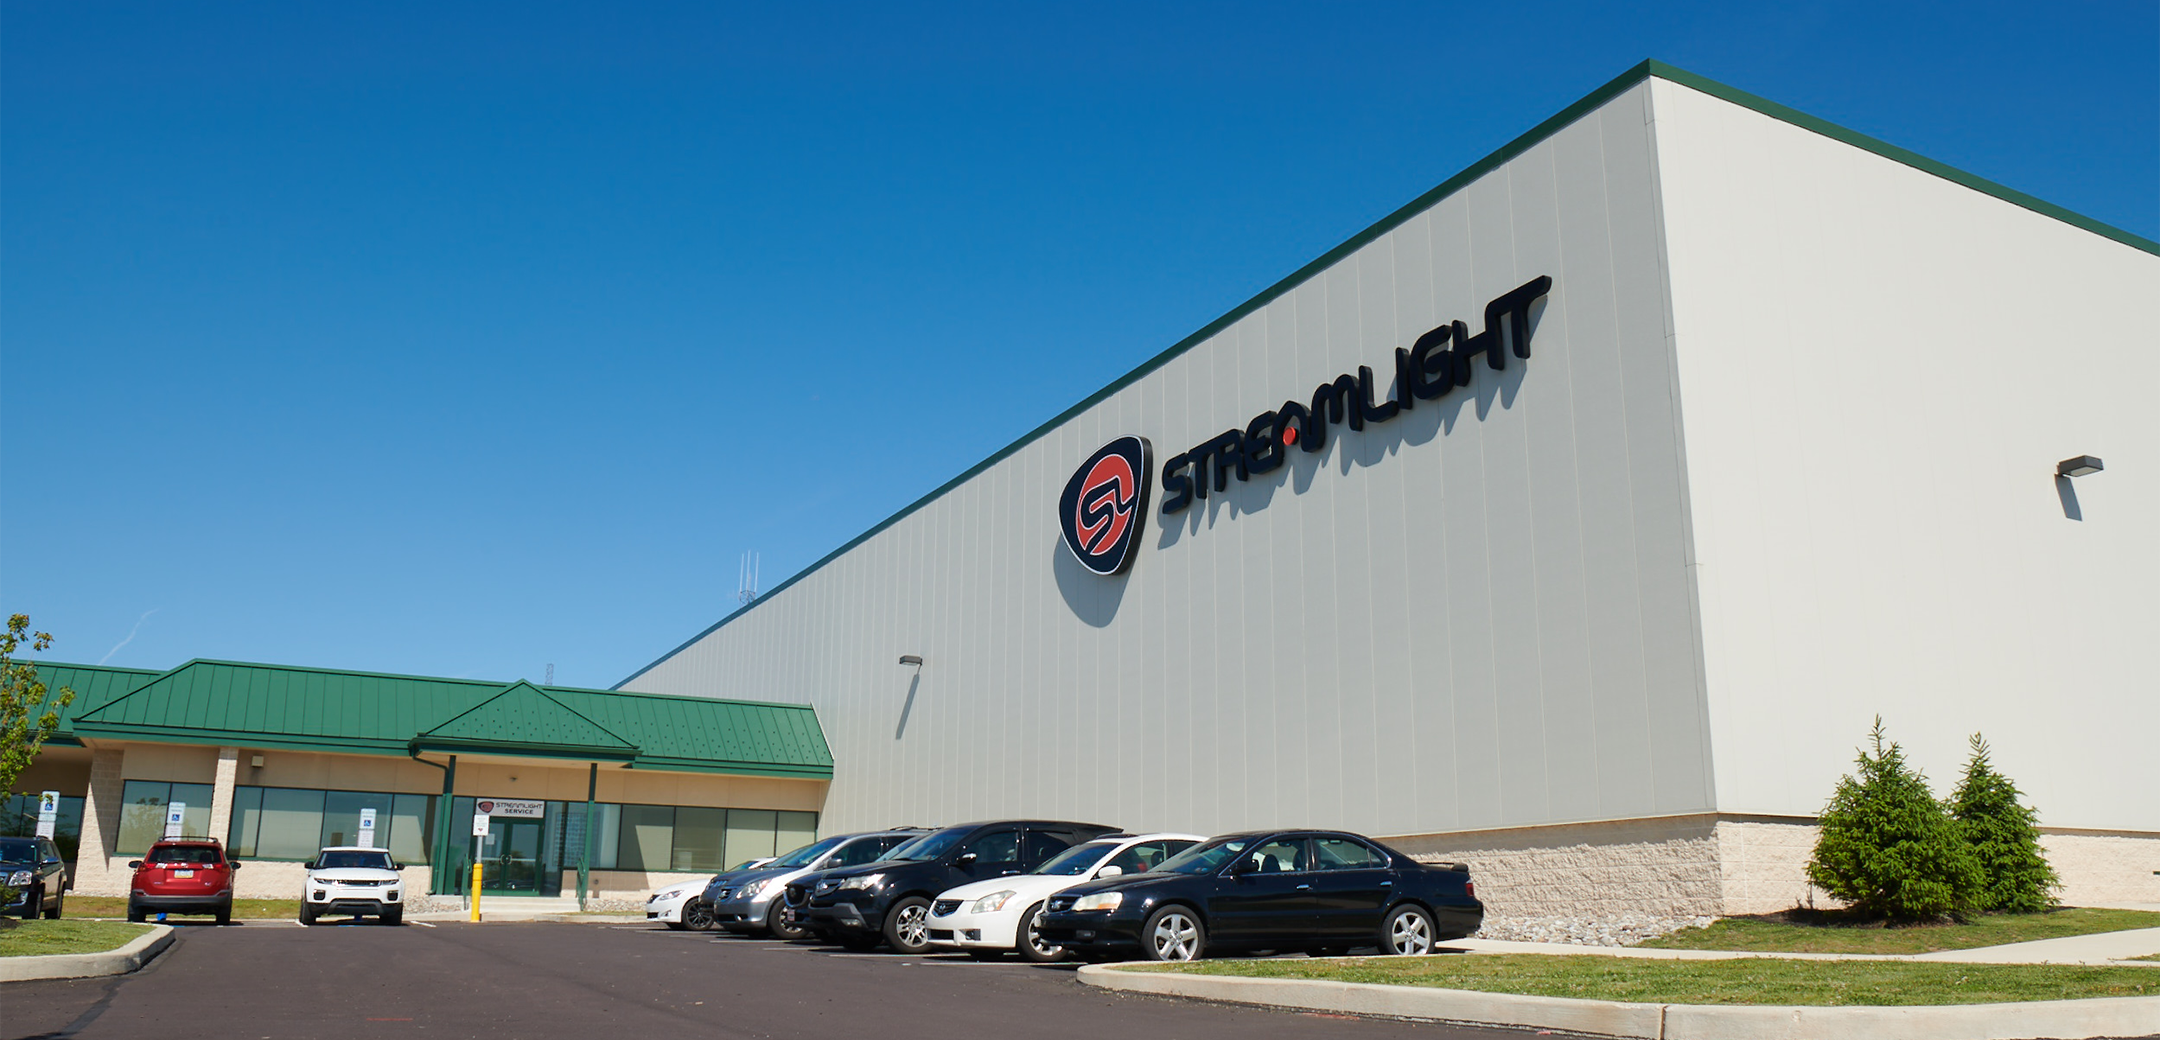 An angled exterior view of the Streamlight warehouse, showcasing the logo, front entrance and parking lot filled with cars.